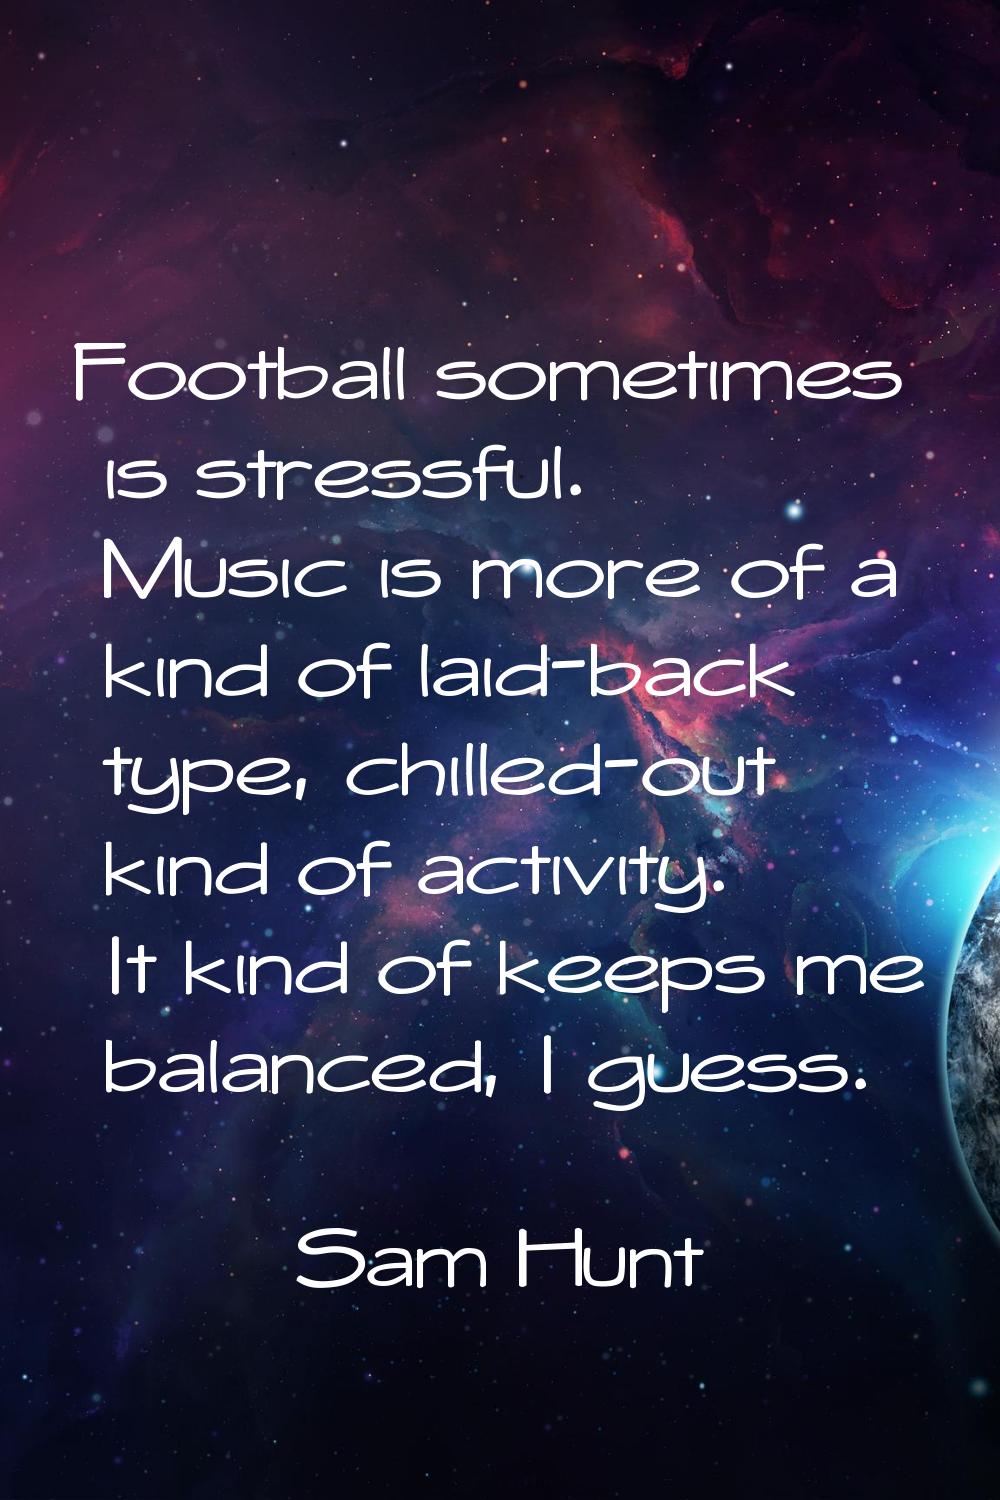 Football sometimes is stressful. Music is more of a kind of laid-back type, chilled-out kind of act